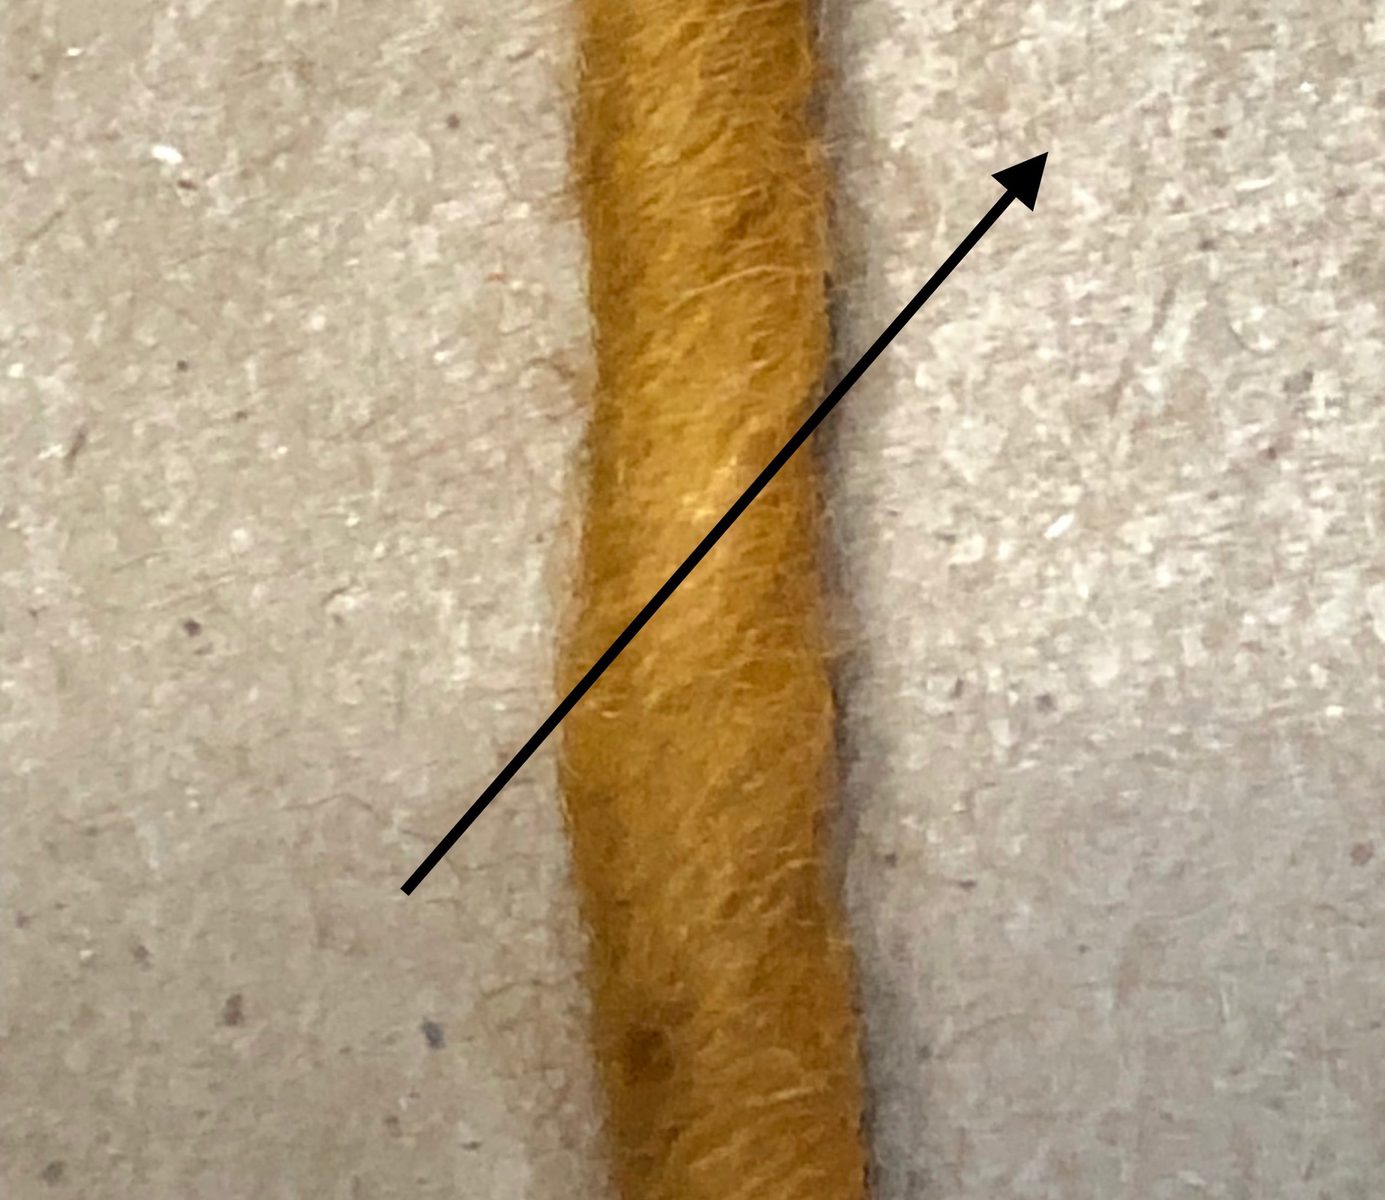 image description: a close-up of a short length of yarn, with an arrow superimposed on the image to indicate the direction of the twist in the yarn